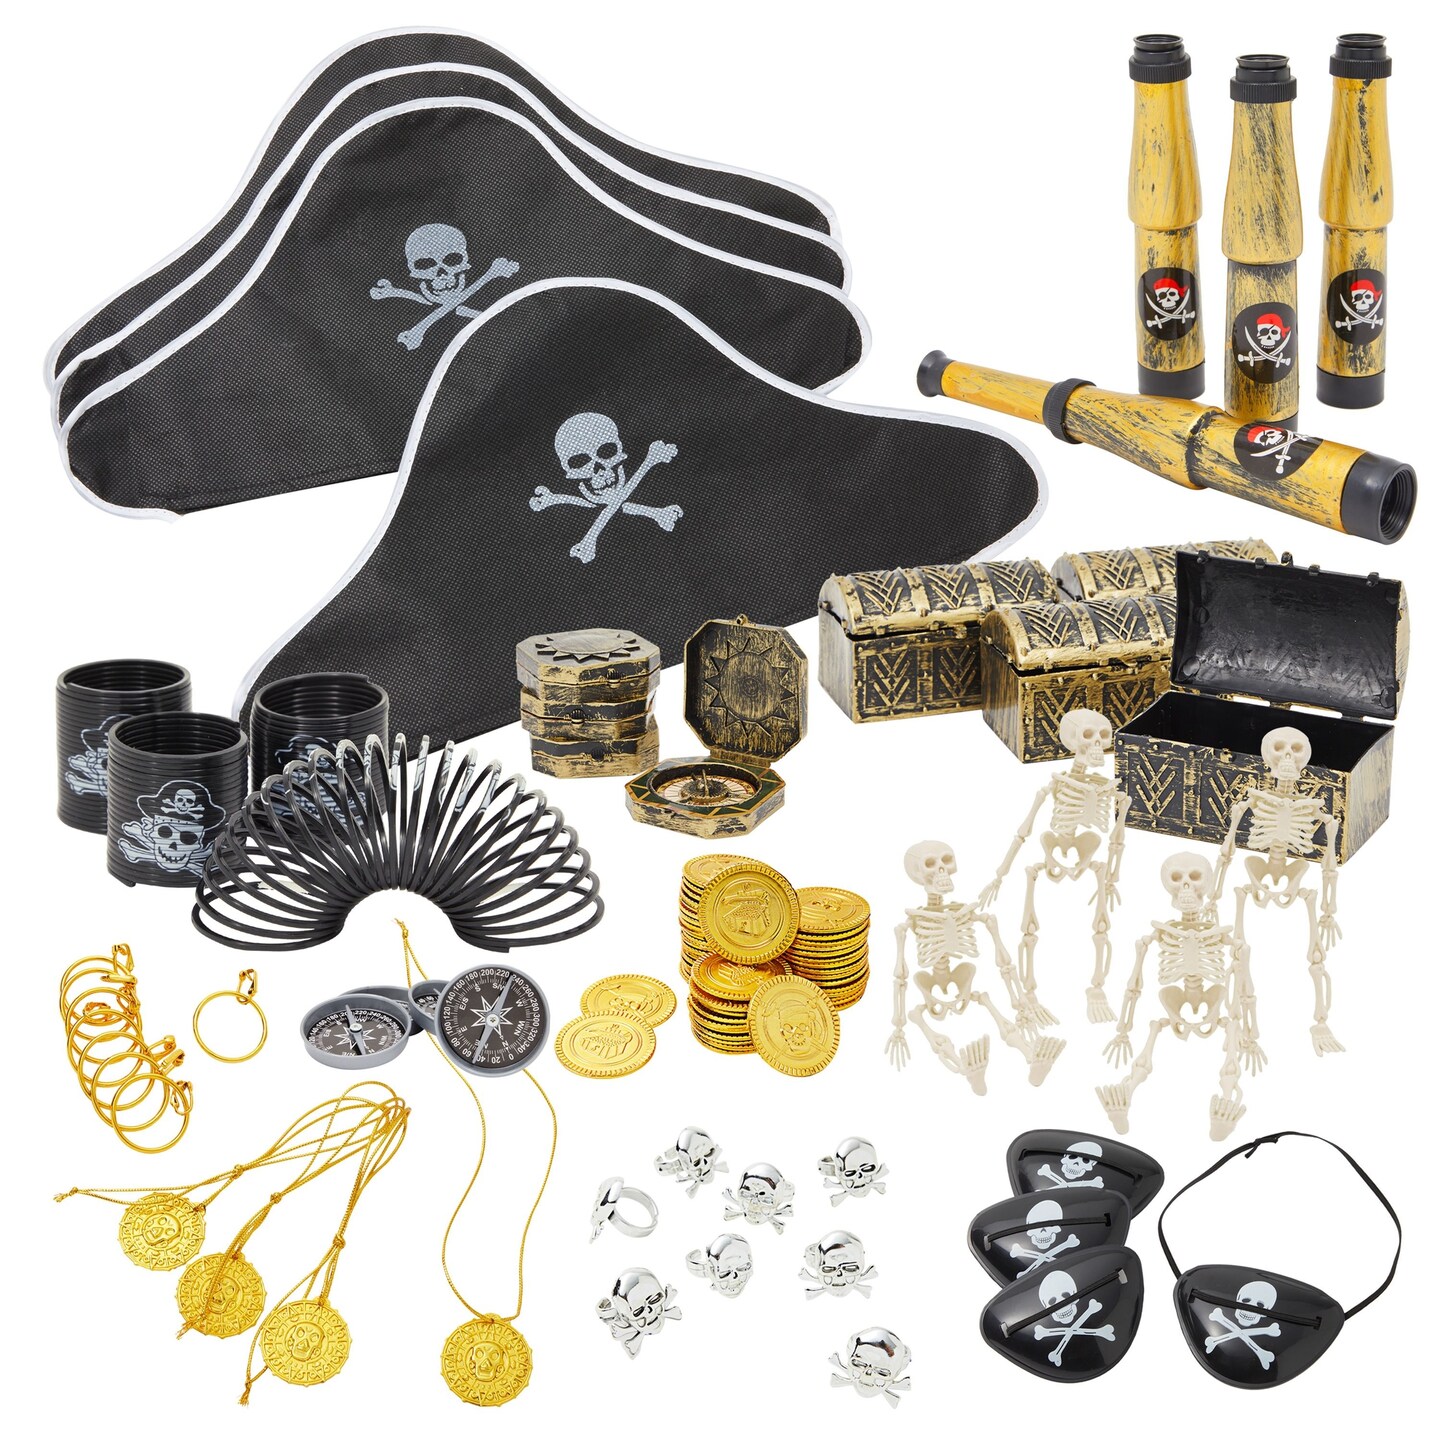 pirate party decorations